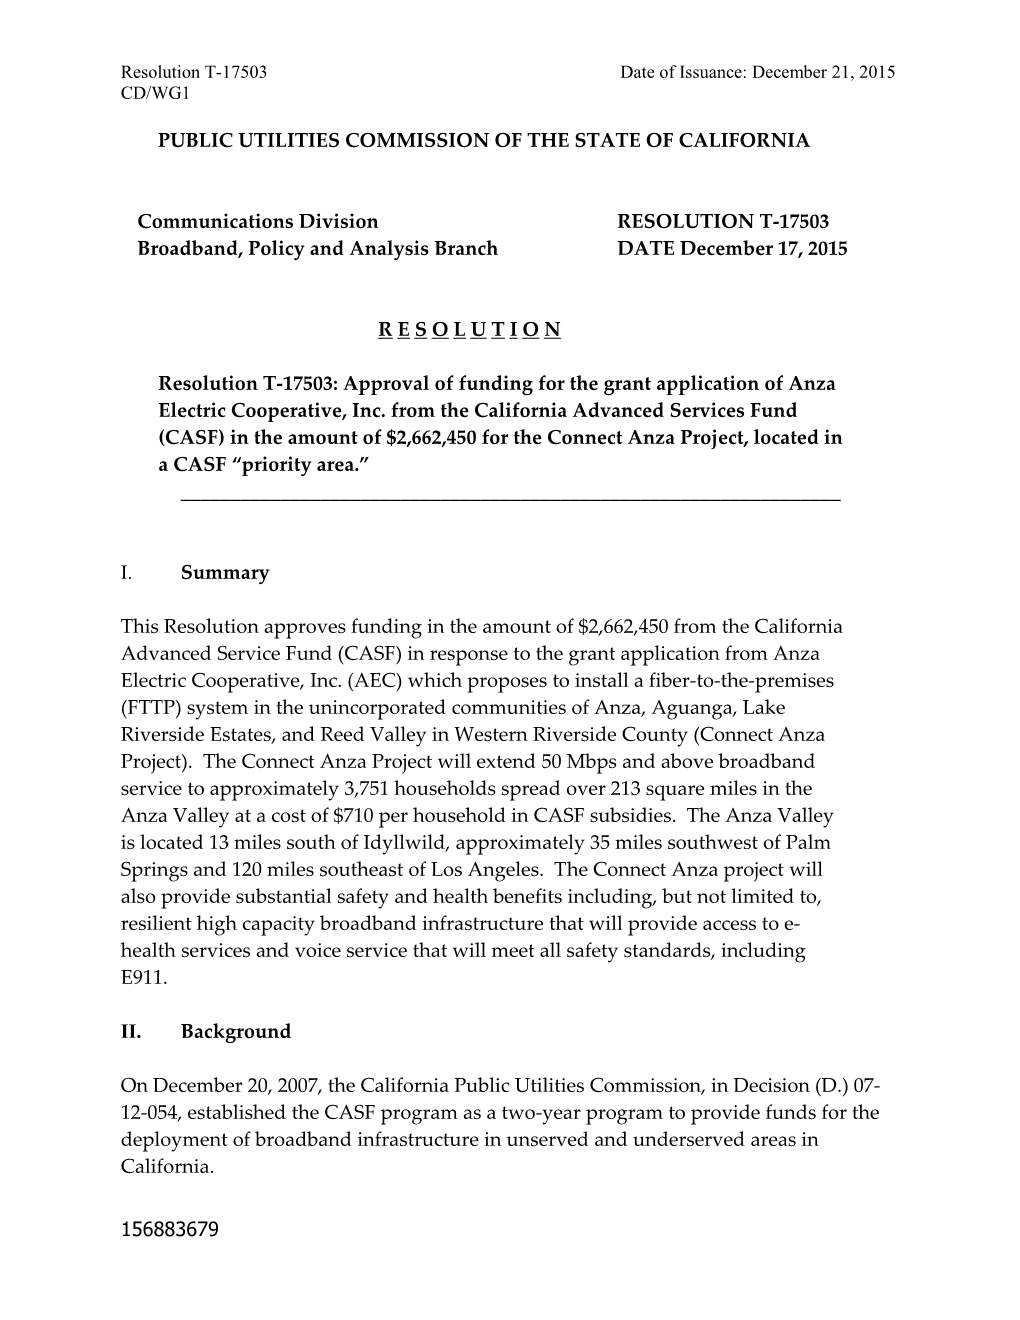 Public Utilities Commission of the State of California s26